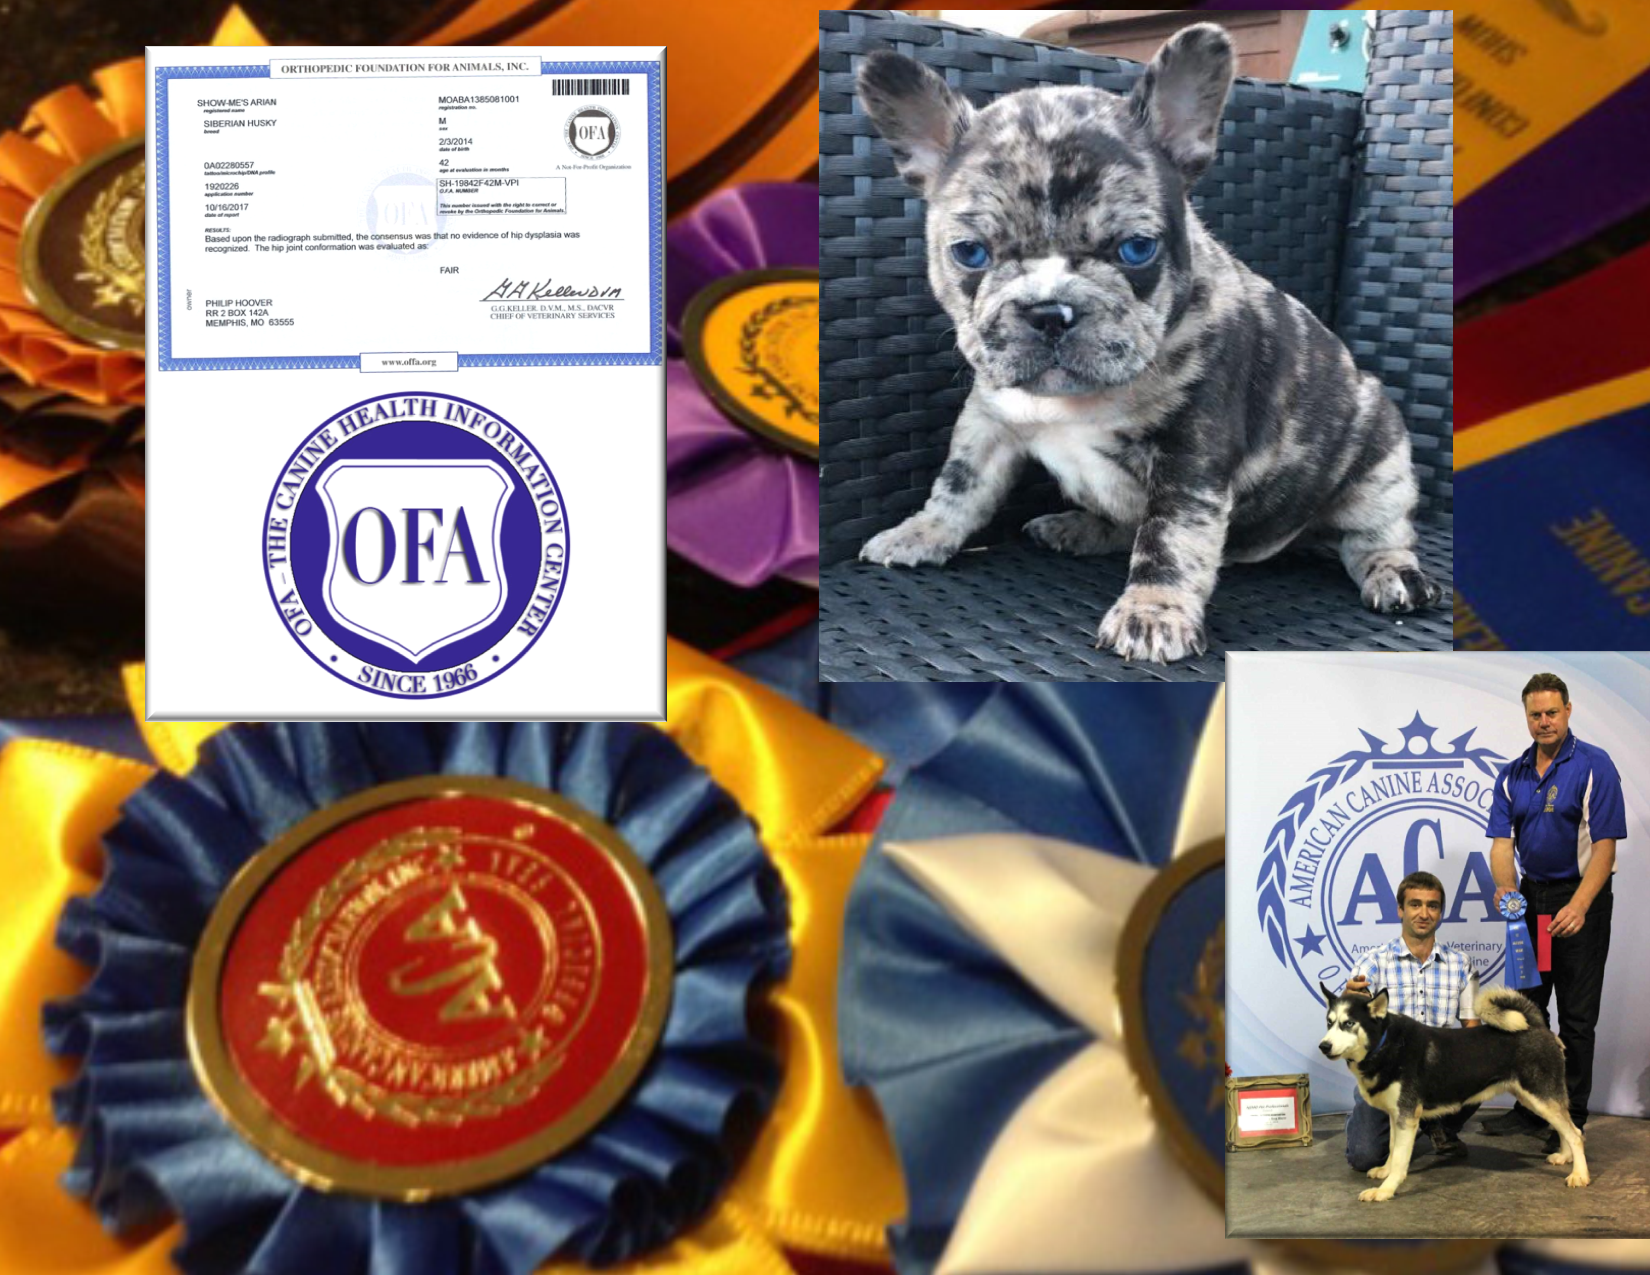 philip, hoover, ofa, dog, breeder, usda, memphis, mo, missouri, philip-hoover, dog-breeder, 43-A-5673, 43A5673, pet, store, puppy, mill, puppymill, show, breeders, kennels, breeds